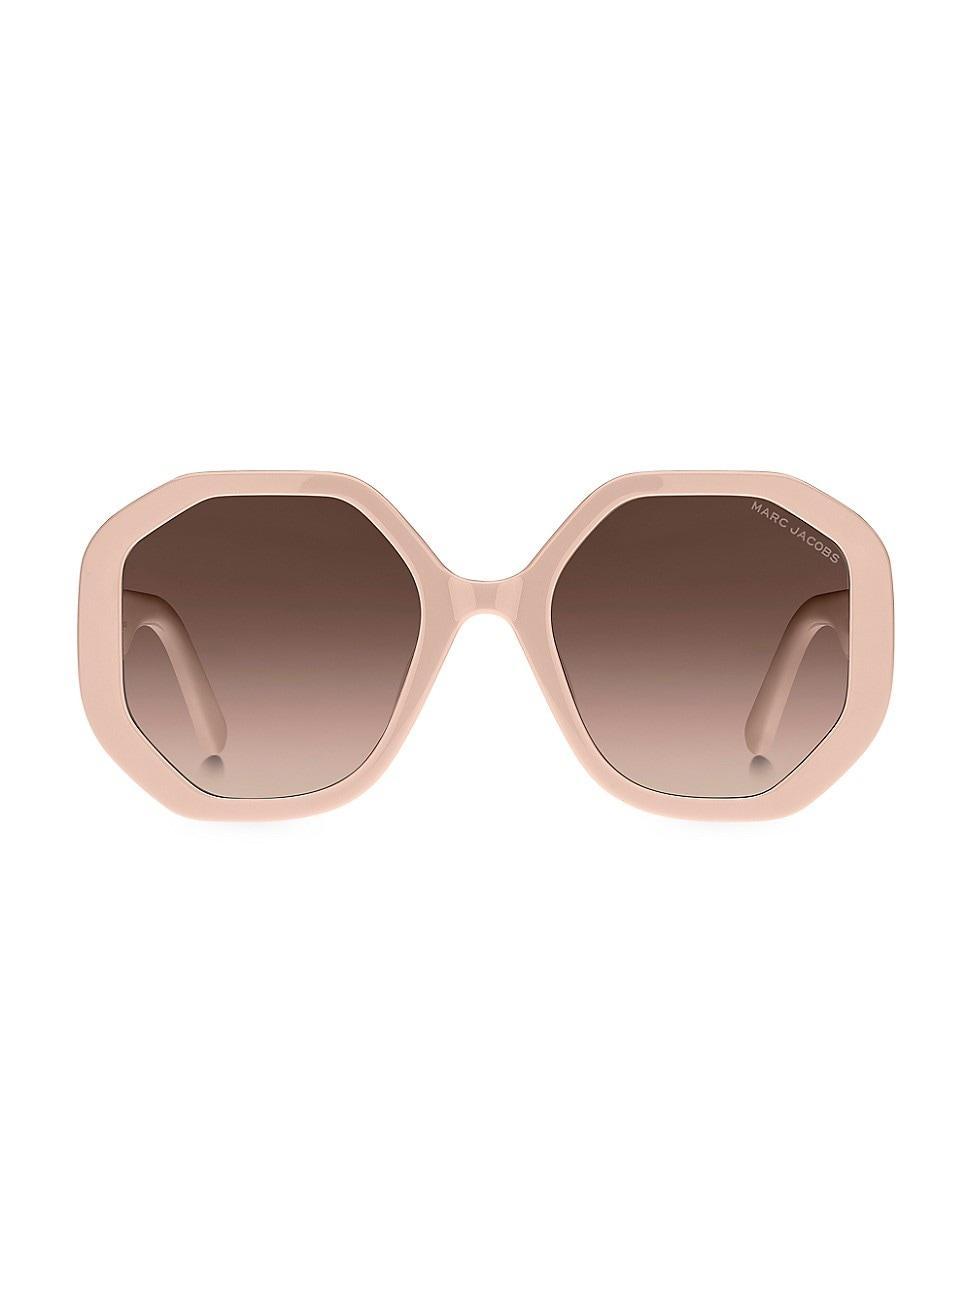 Marc Jacobs 53mm Gradient Round Sunglasses Product Image